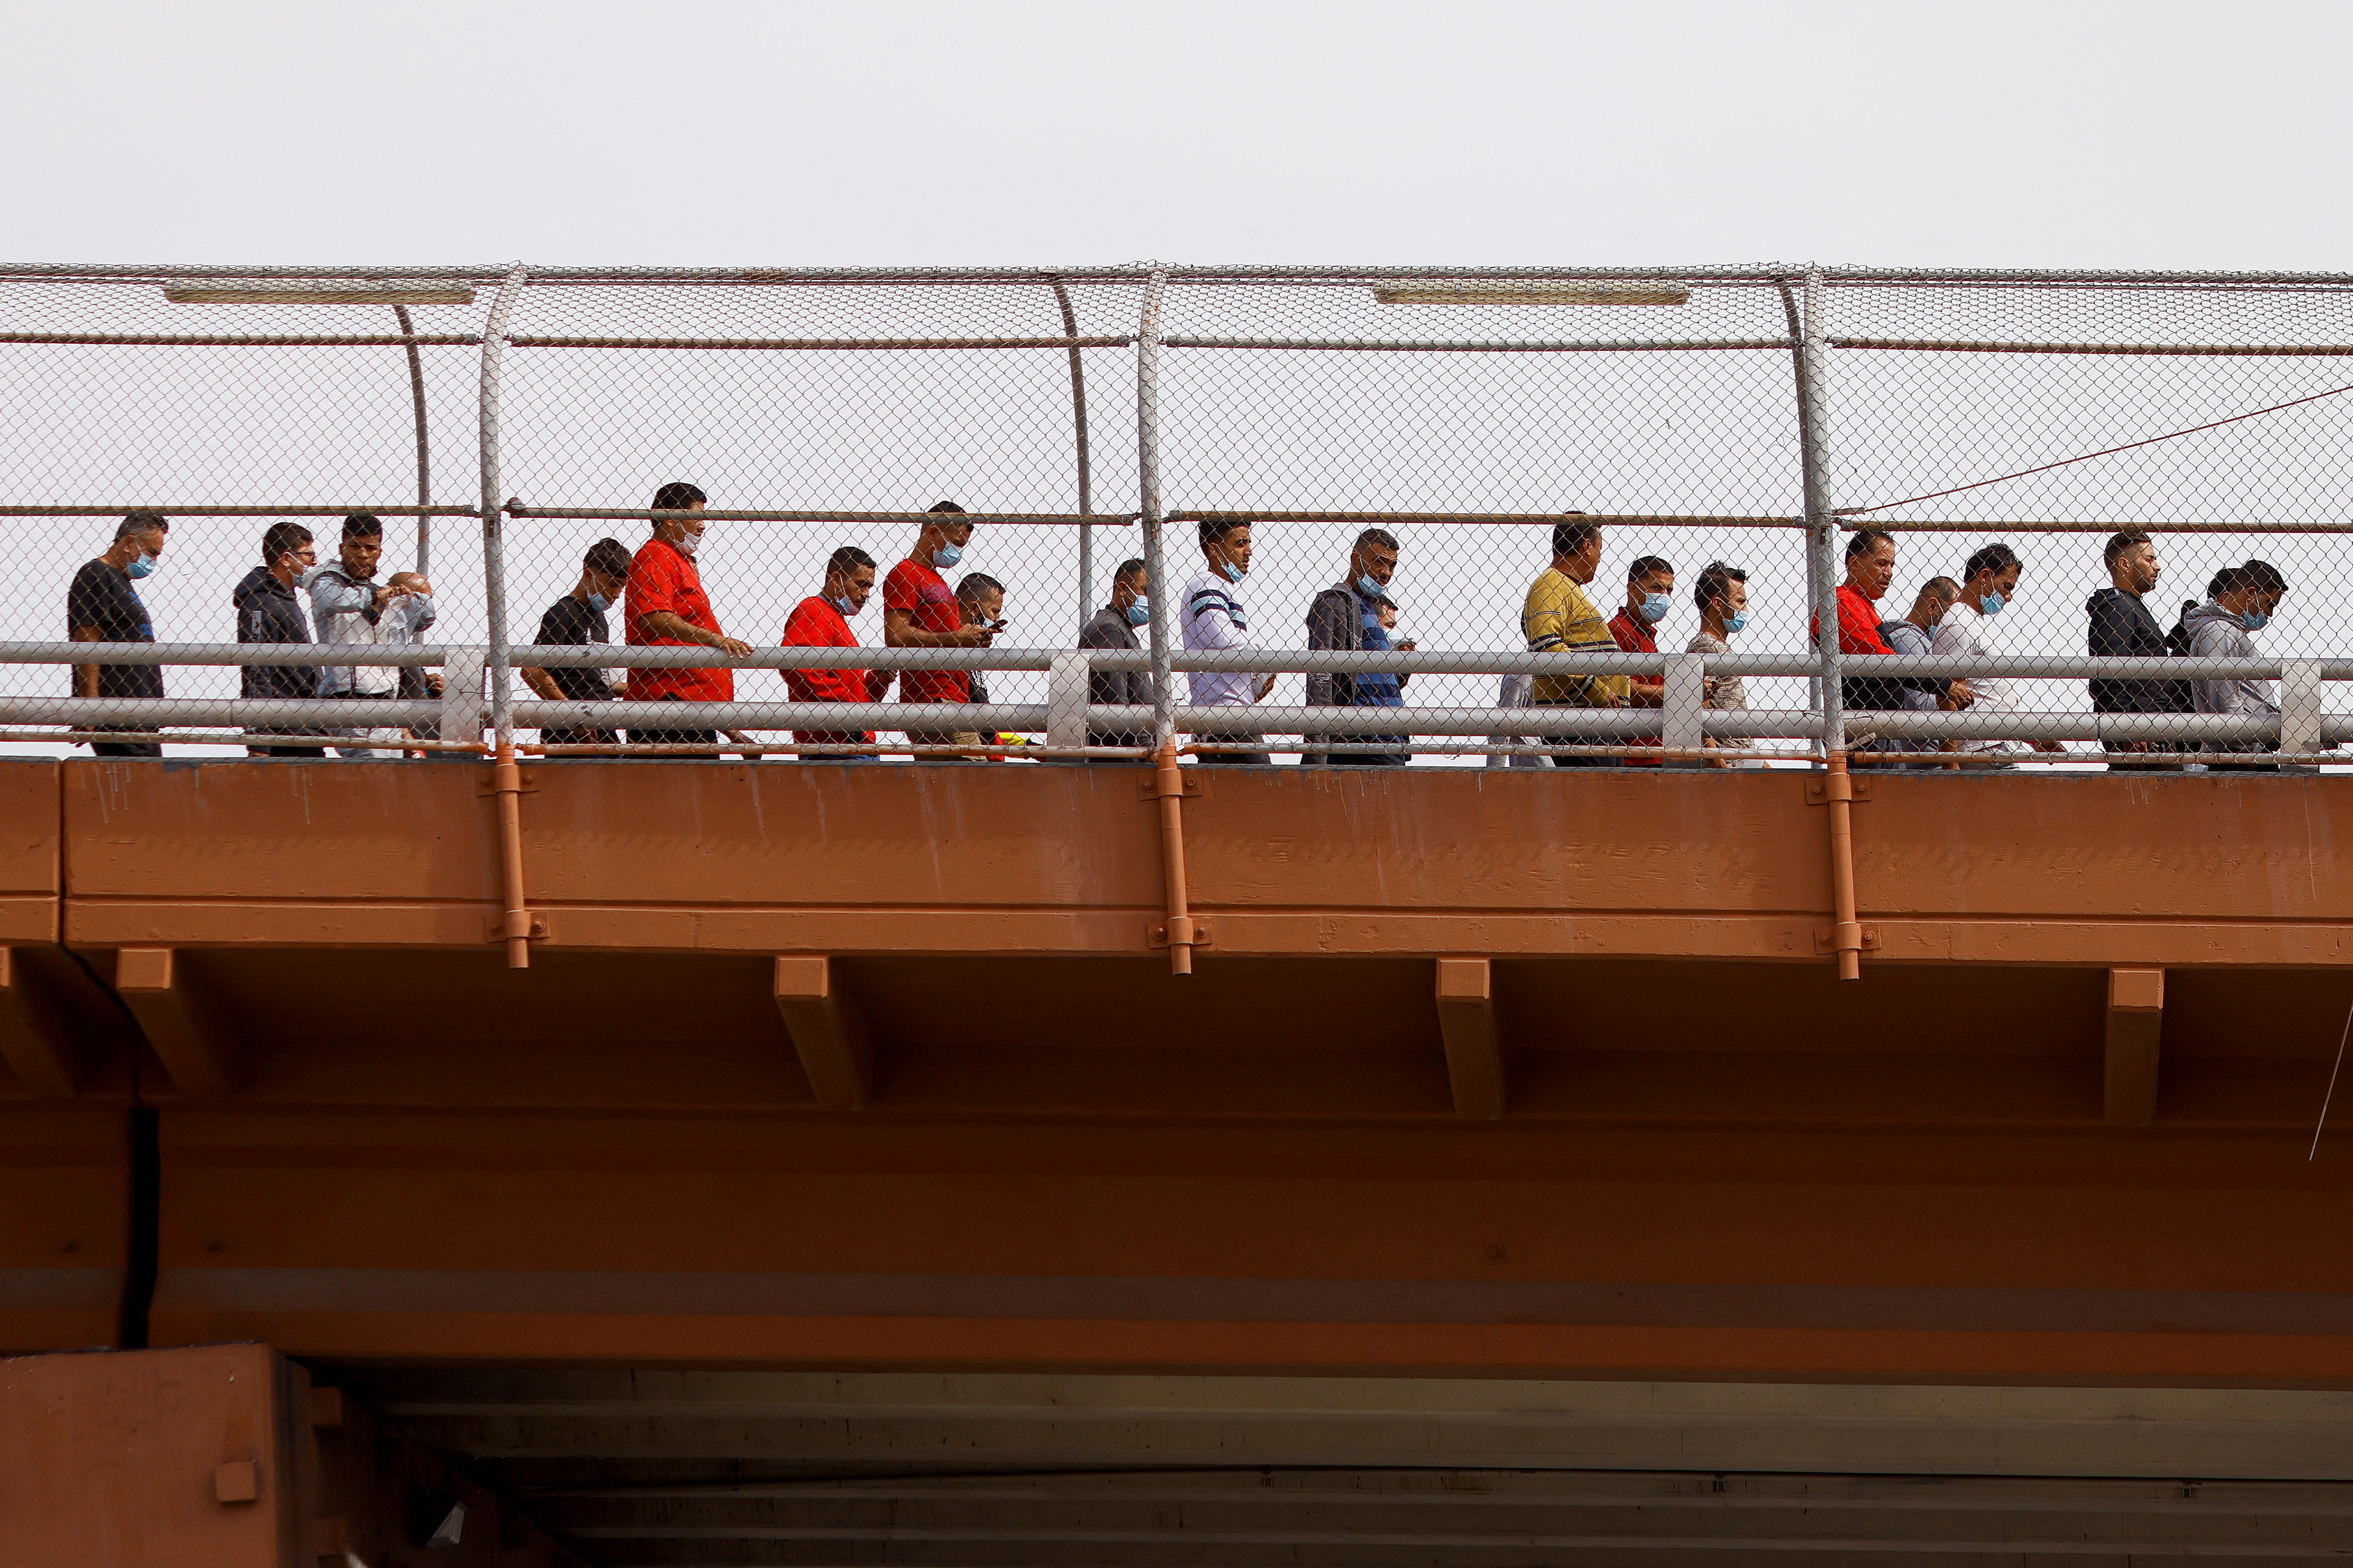 Venezuelan migrants, expelled from the United States and returned to Mexico under Title 42, walk into Mexico across the Lerdo-Stanton international border bridge, in this image taken from Ciudad Juarez, Mexico on October 14, 2022. REUTERS/Jose Luis Gonzalez